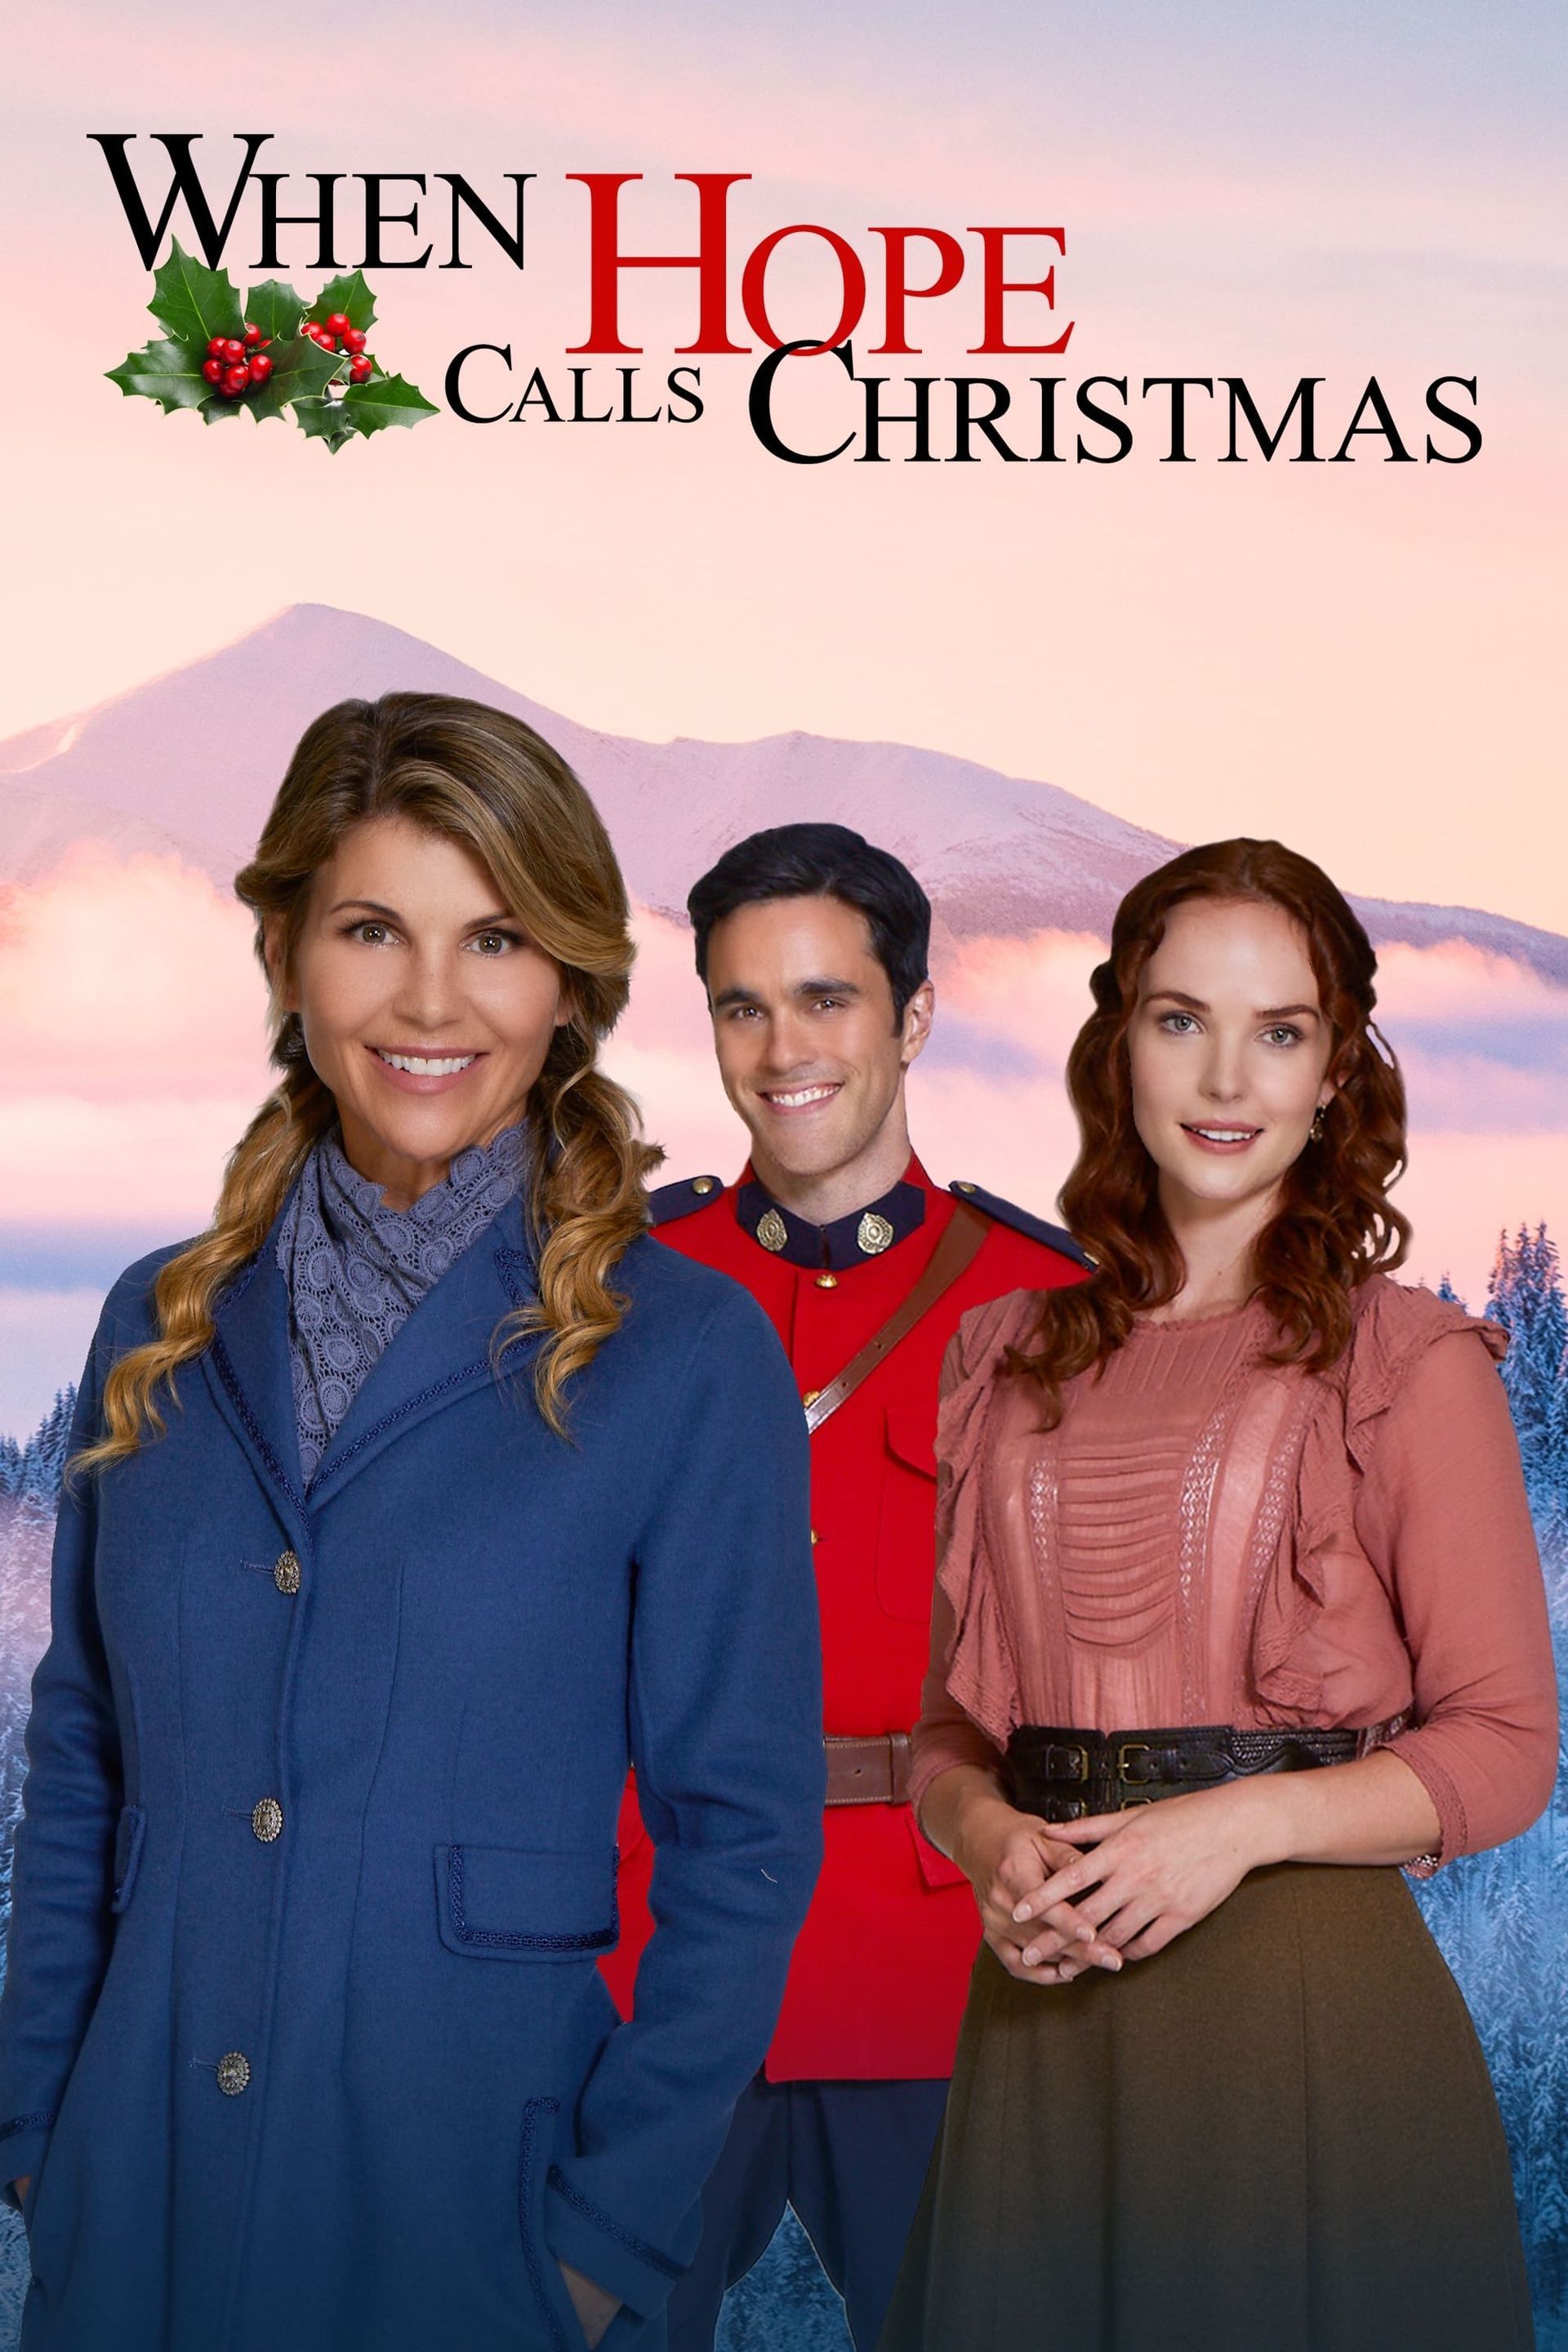 About When Hope Calls  Find romance, Hallmark channel, Christmas